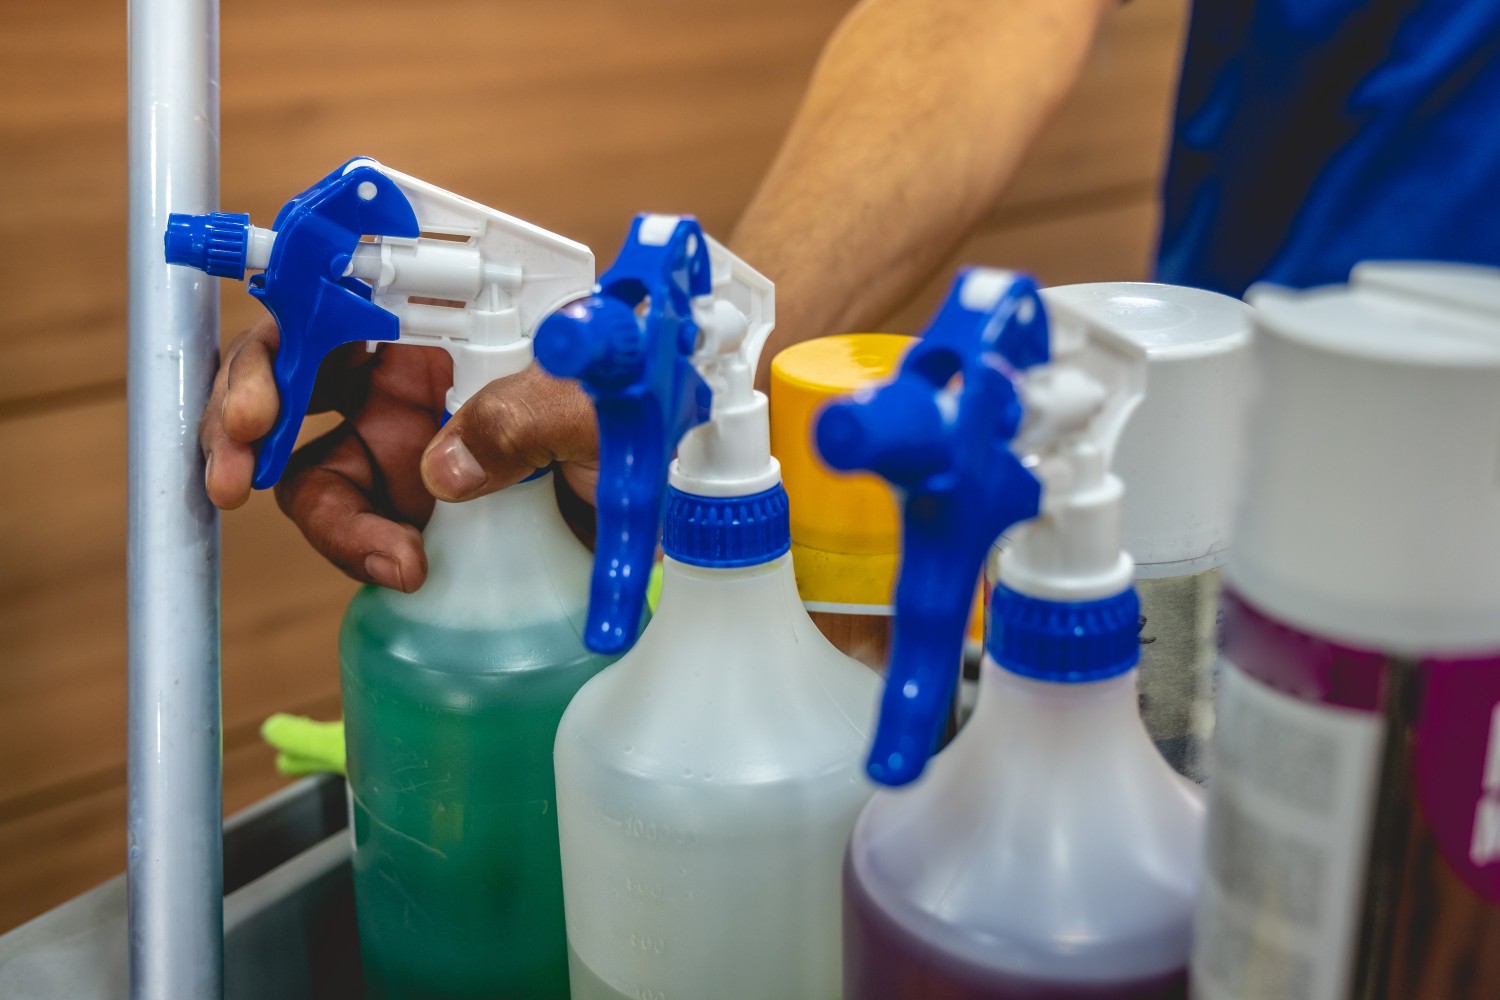 Hand of young janitorial services worker holding a sprayer with cleaner in trolley of cleaning supplies